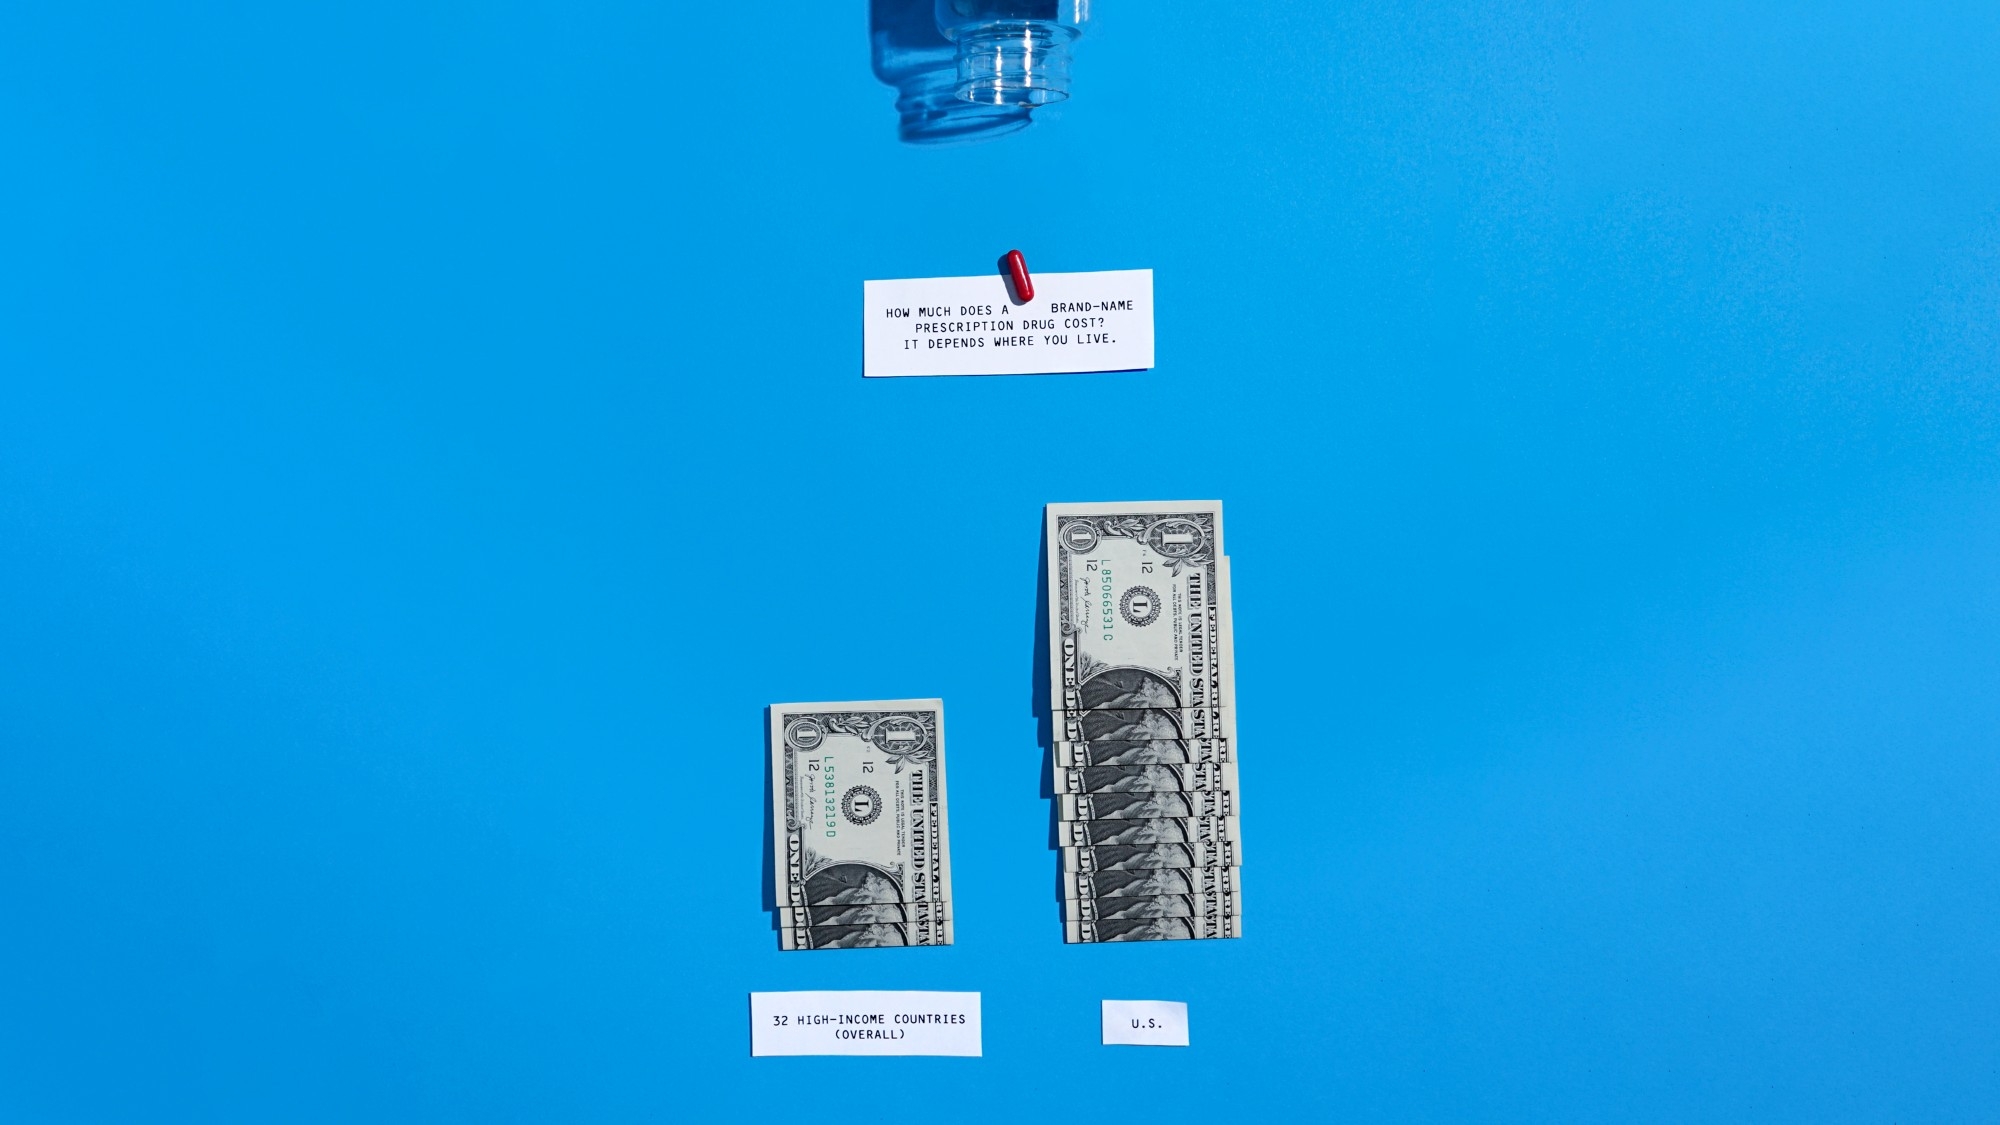 Photographic data visualization by Gabrielle Mérite representing the prices of brand-name drugs with real money on a blue background where, for the same pill, the U.S cost is $10 while the overall cost in 32 high-income countries would be $3.00.